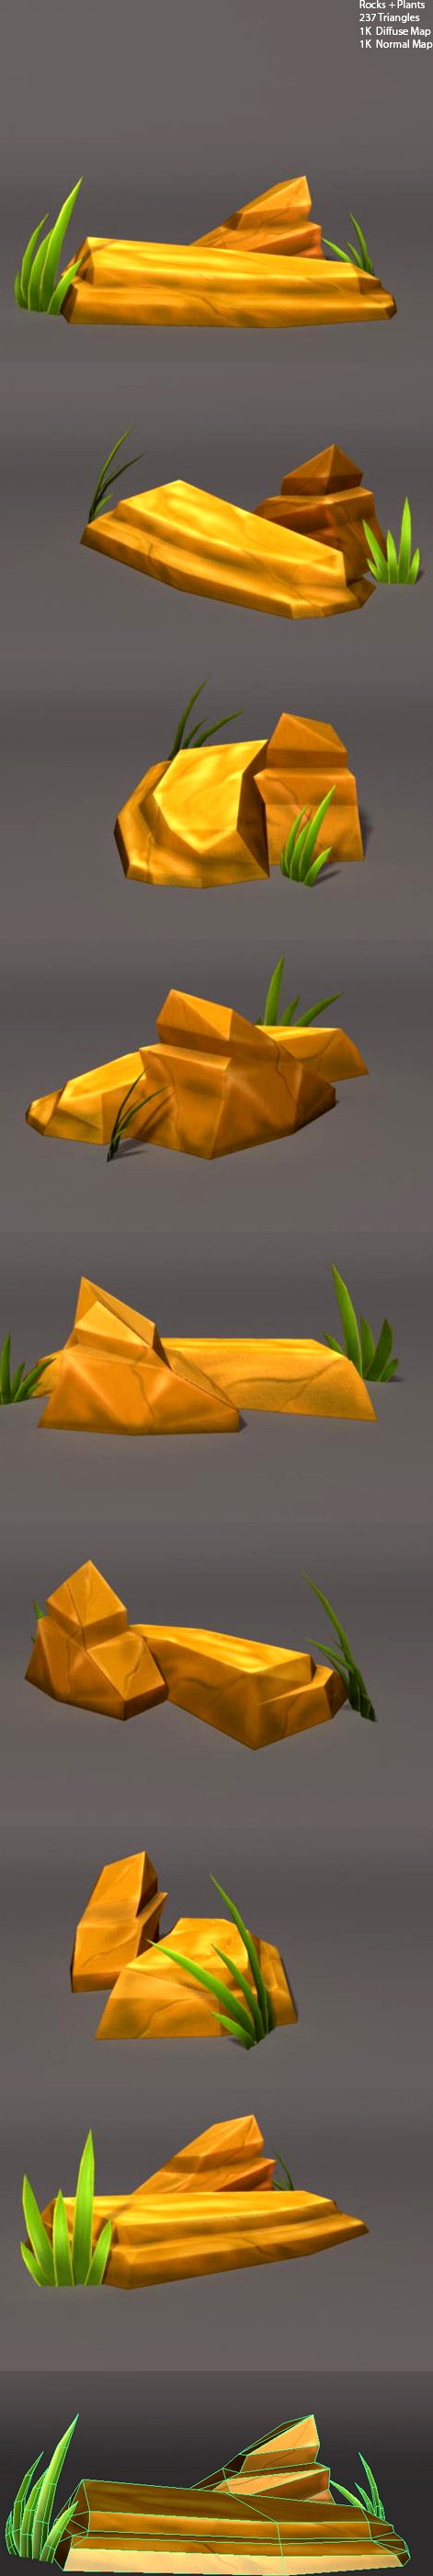 Low Poly Rocks and Plants